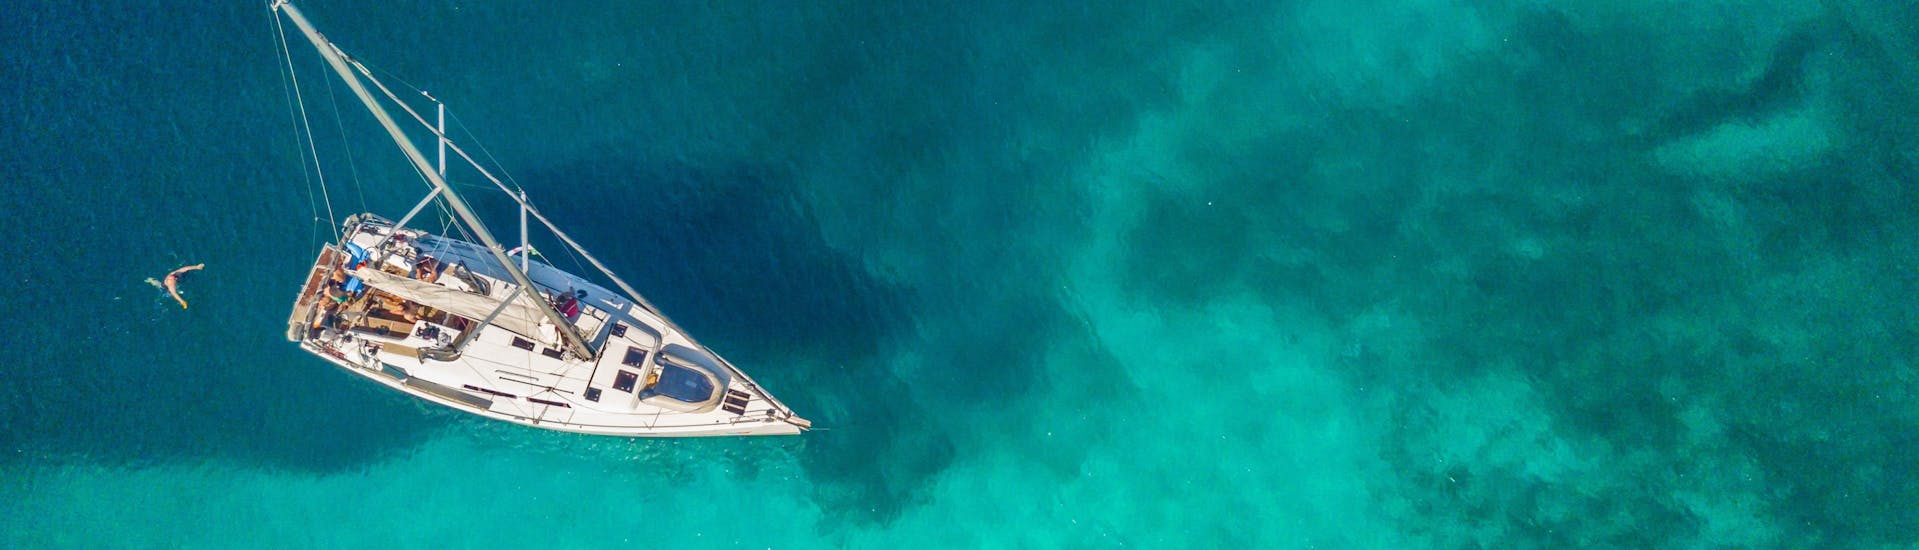 Sailboat from above in emerald water